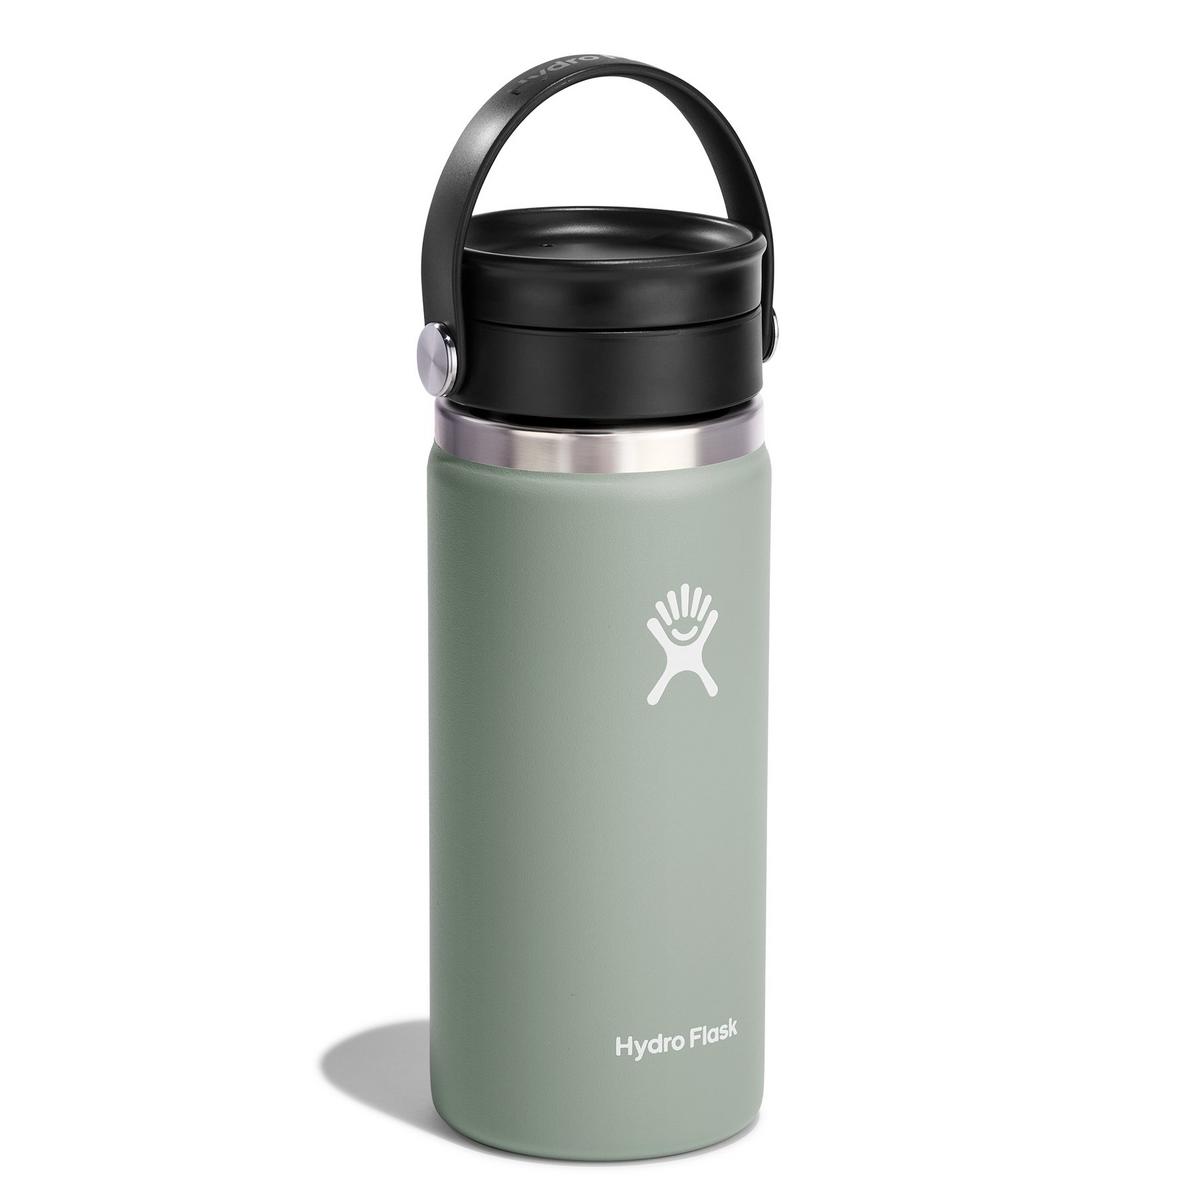 Hydro Flask 16 oz Wide Mouth Flex Coffee Flask - Agave Green